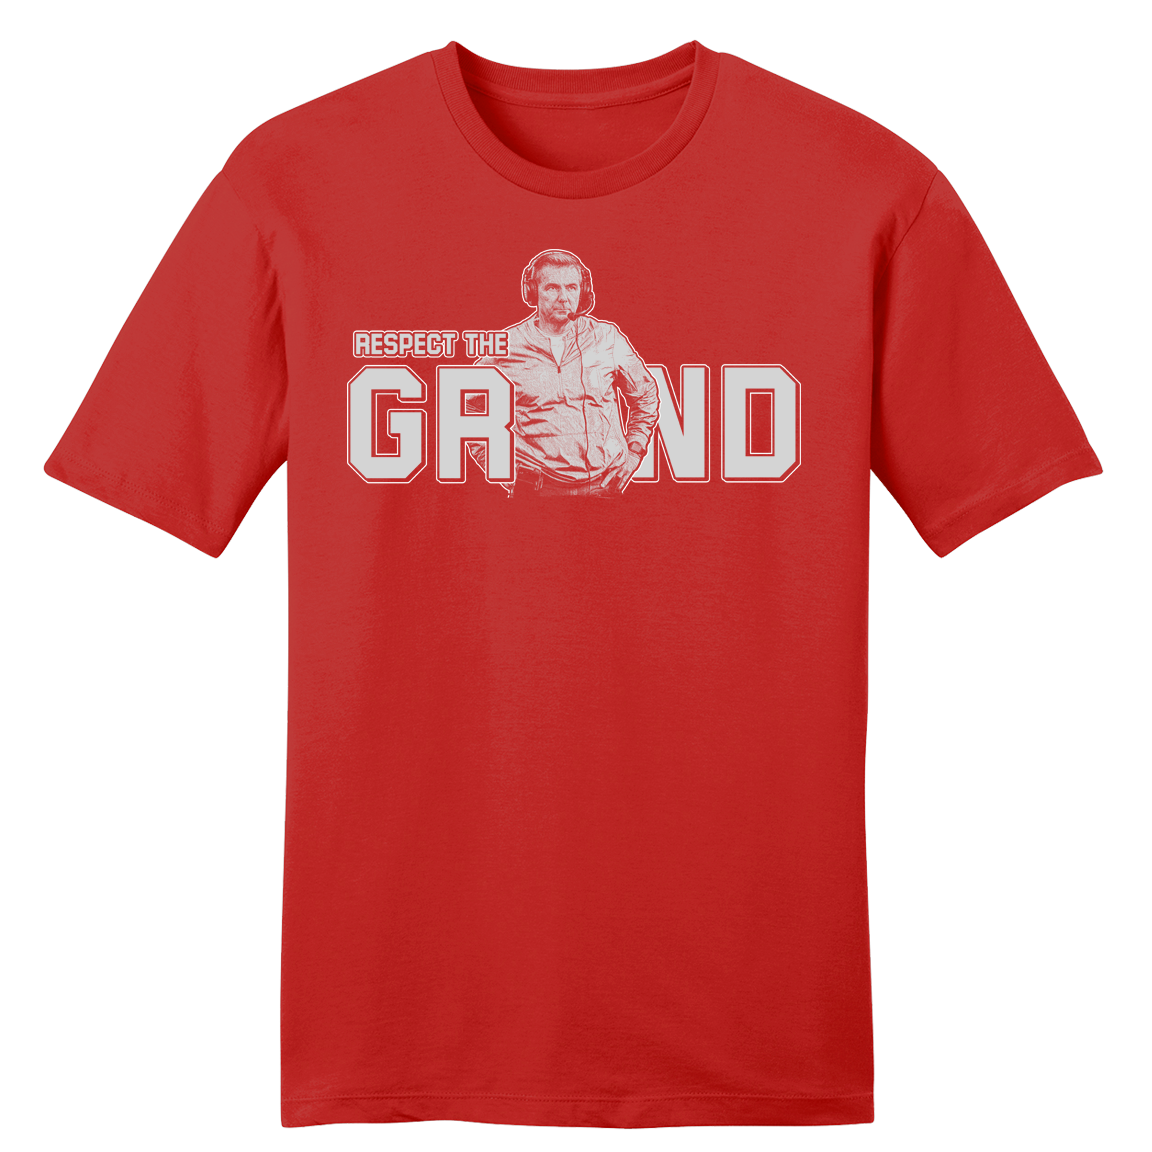 Respect the Grind T-shirt